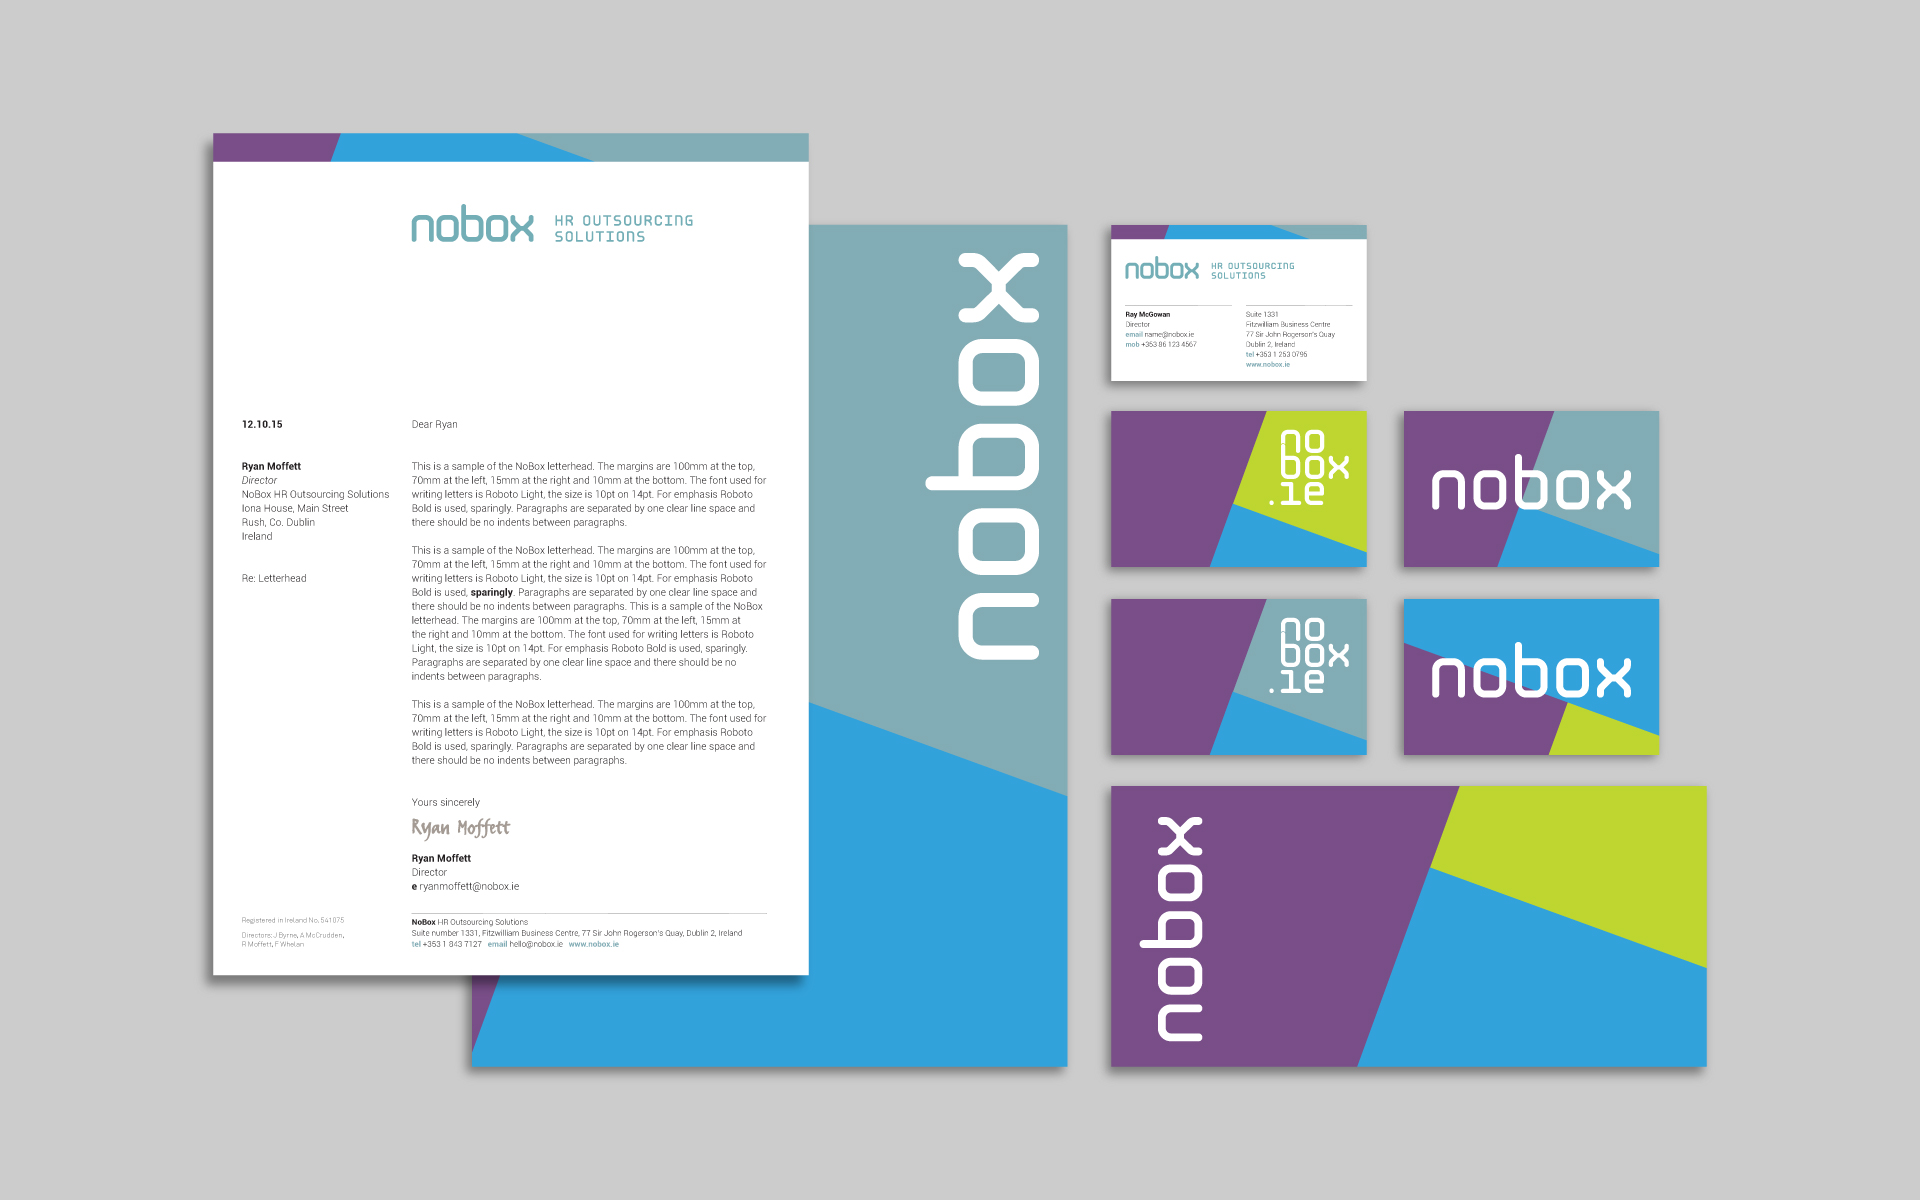 Nobox HR Outsourcing Solutions stationery system